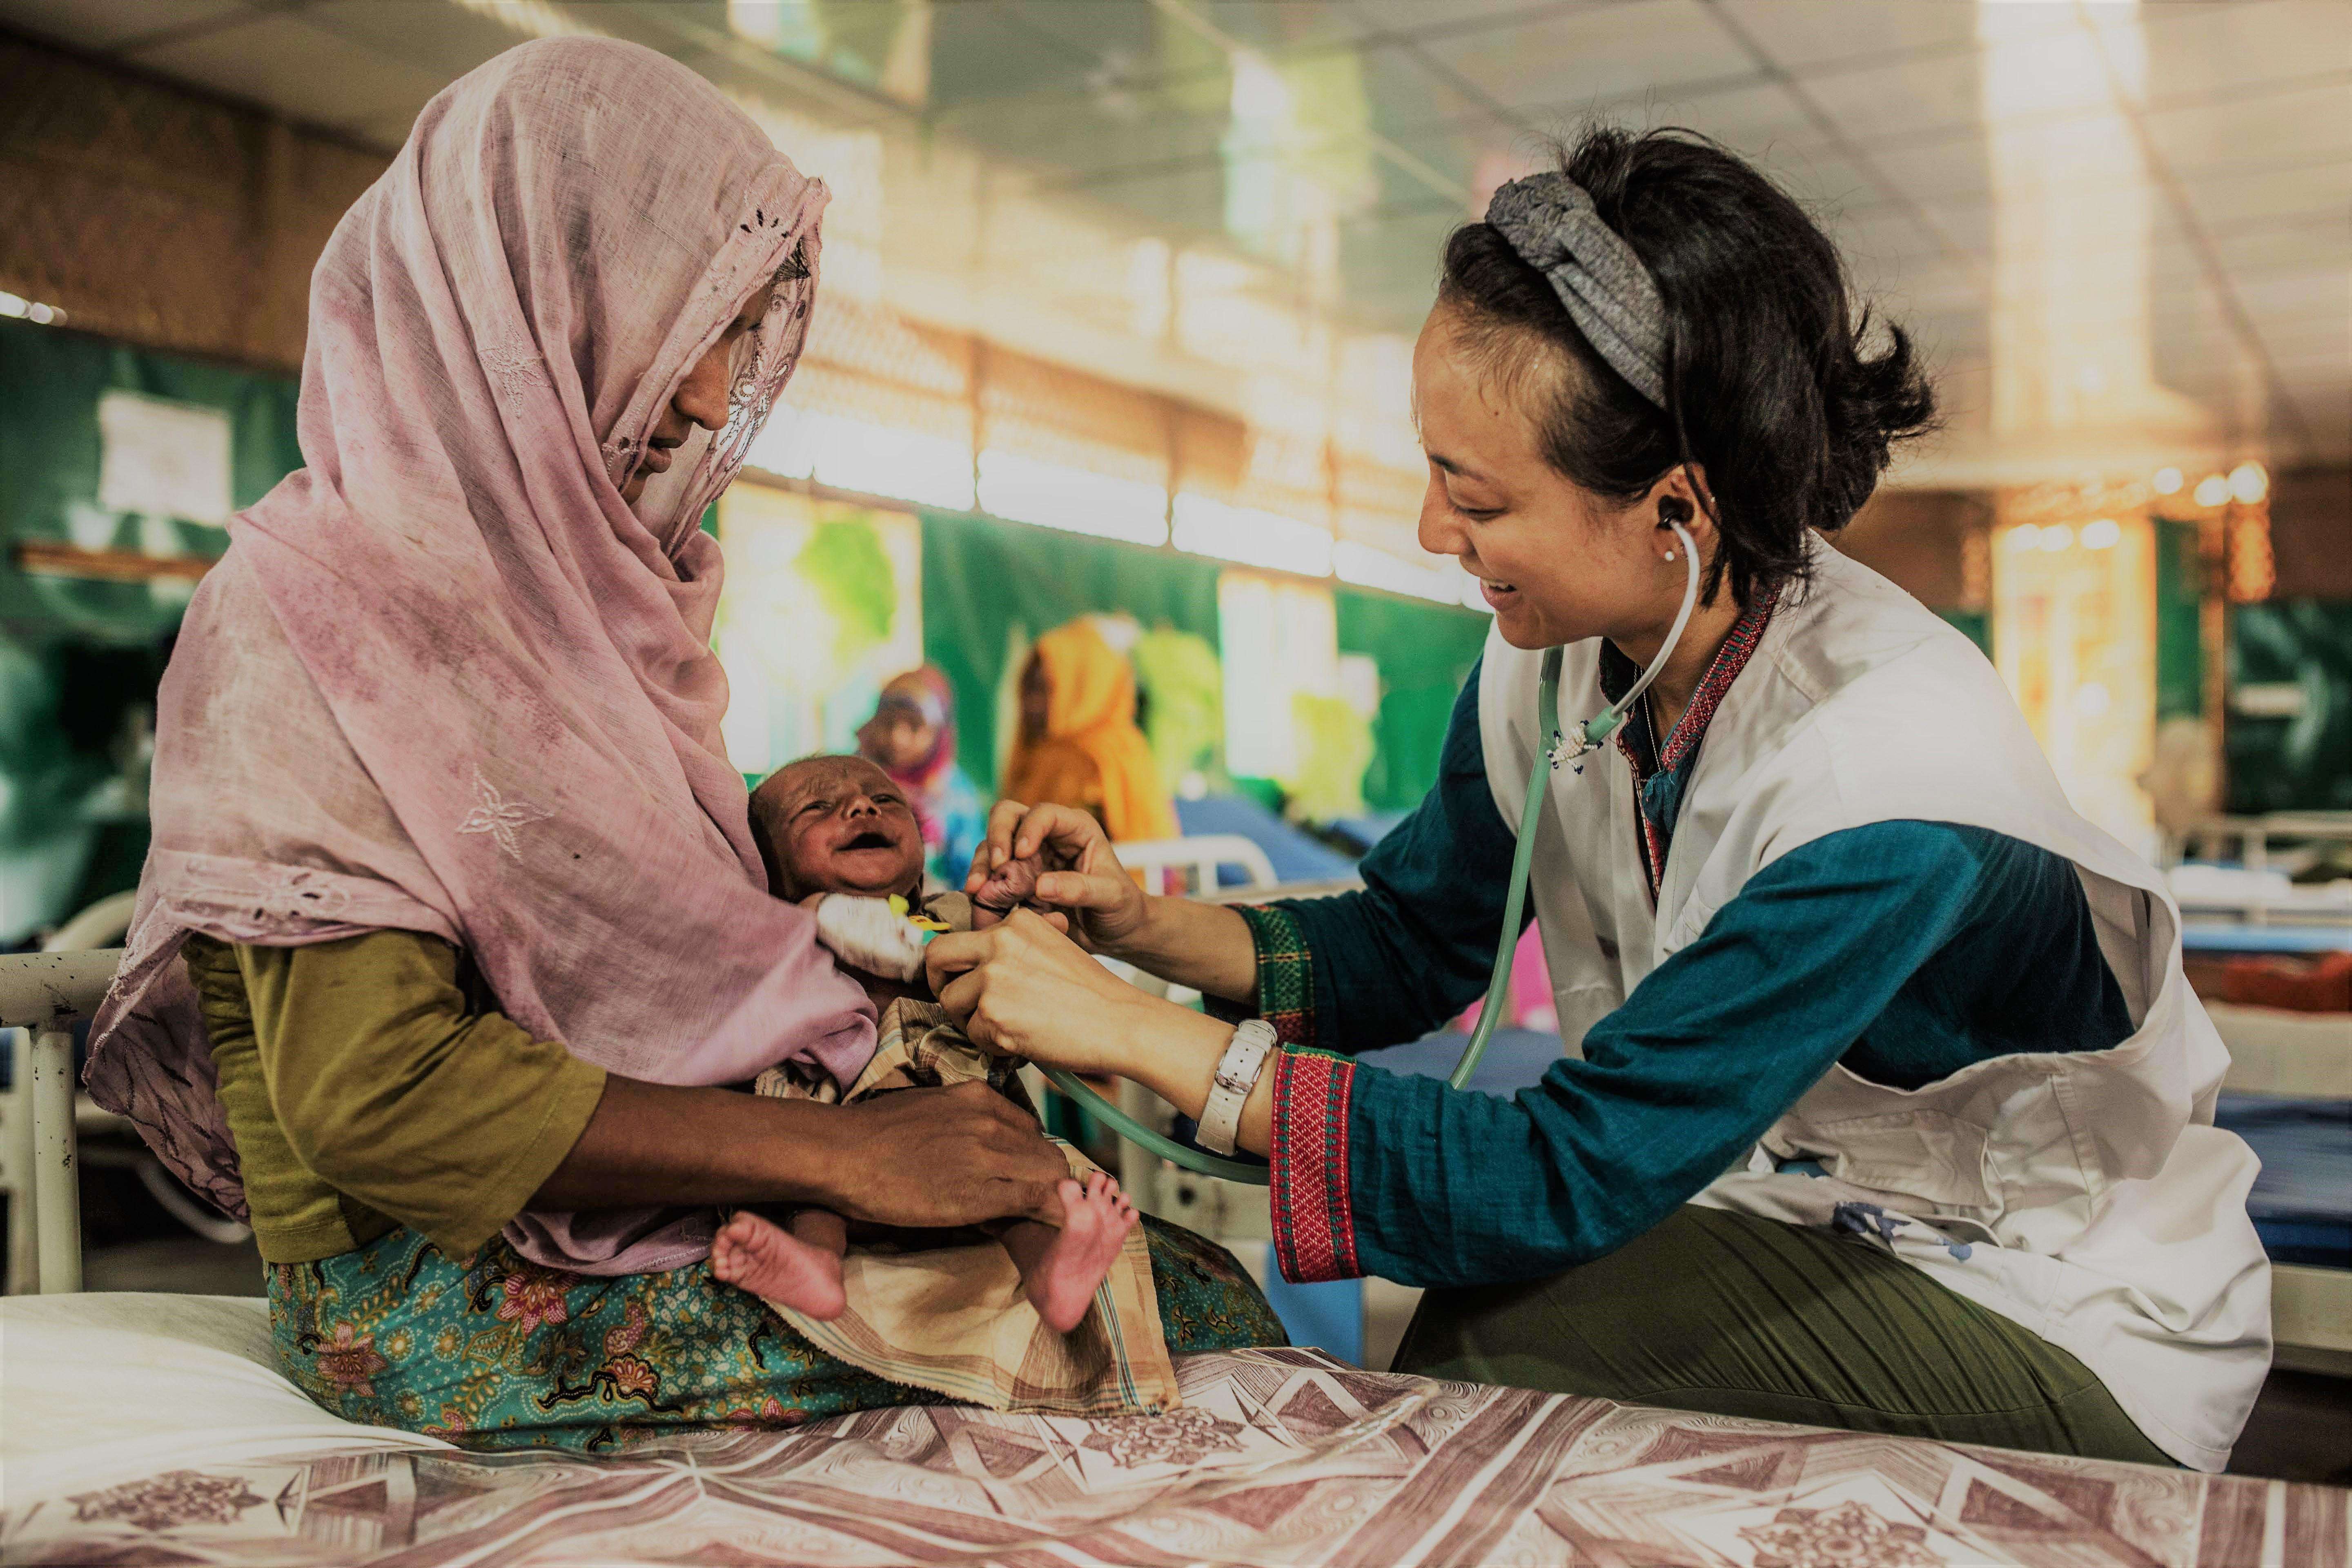 MSF fieldworker providing care to a child in the MSF hospital in Goyalmara.